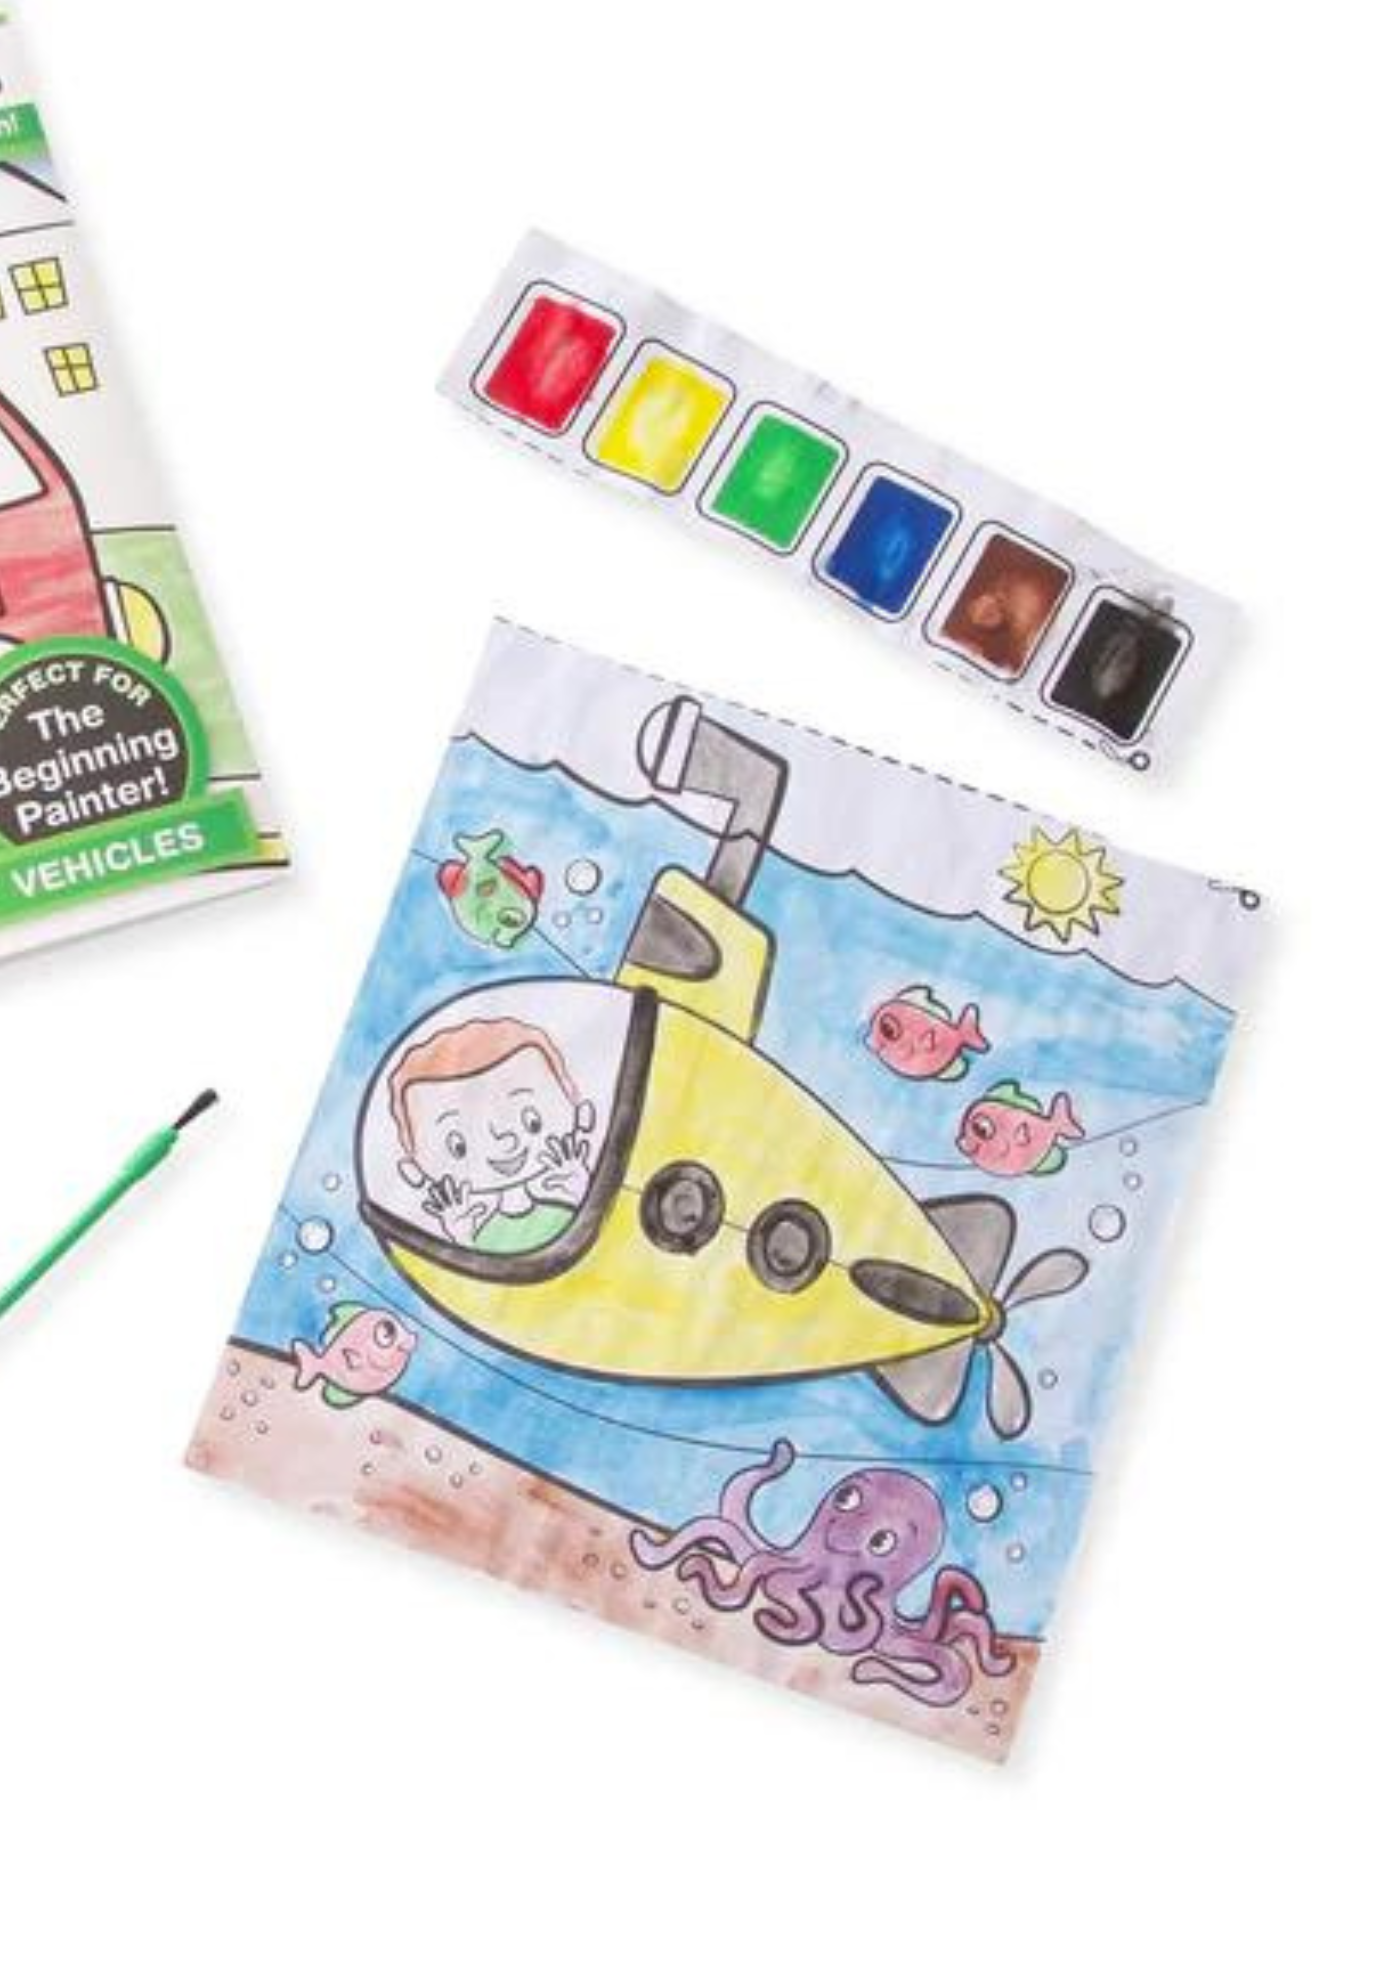 PAINT WITH WATER KIDS' ART PAD-VEHICLES